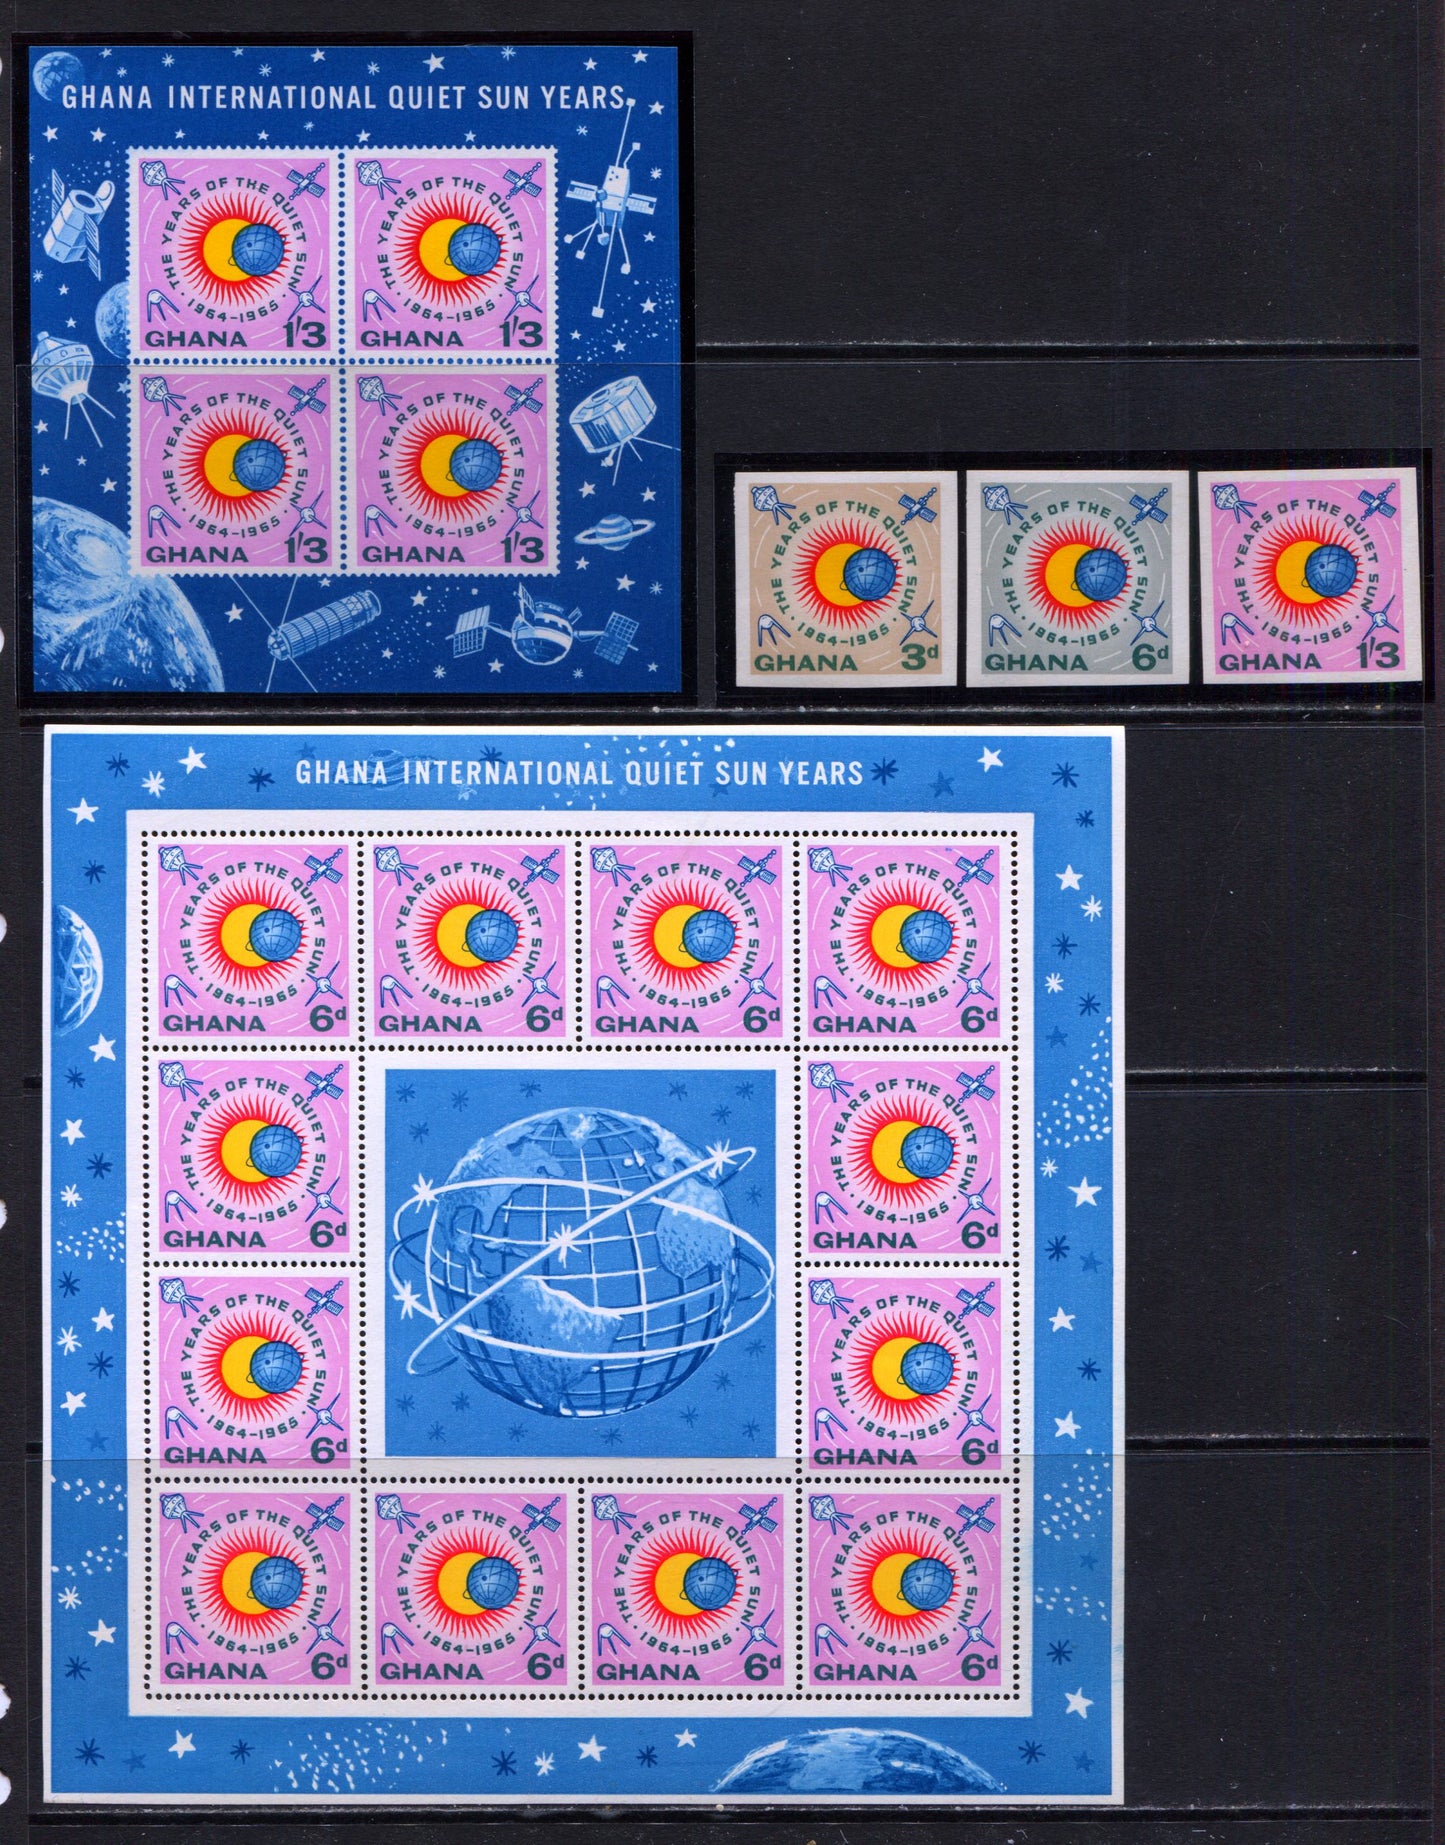 Lot 156 Ghana SC#164-188 1964 Quiet Sun Year Issue, A VFNH Range Of Perf & Imperf Singles, Souvenir Sheets & FDC's, 2017 Scott Cat. $12.65 USD, Click on Listing to See ALL Pictures